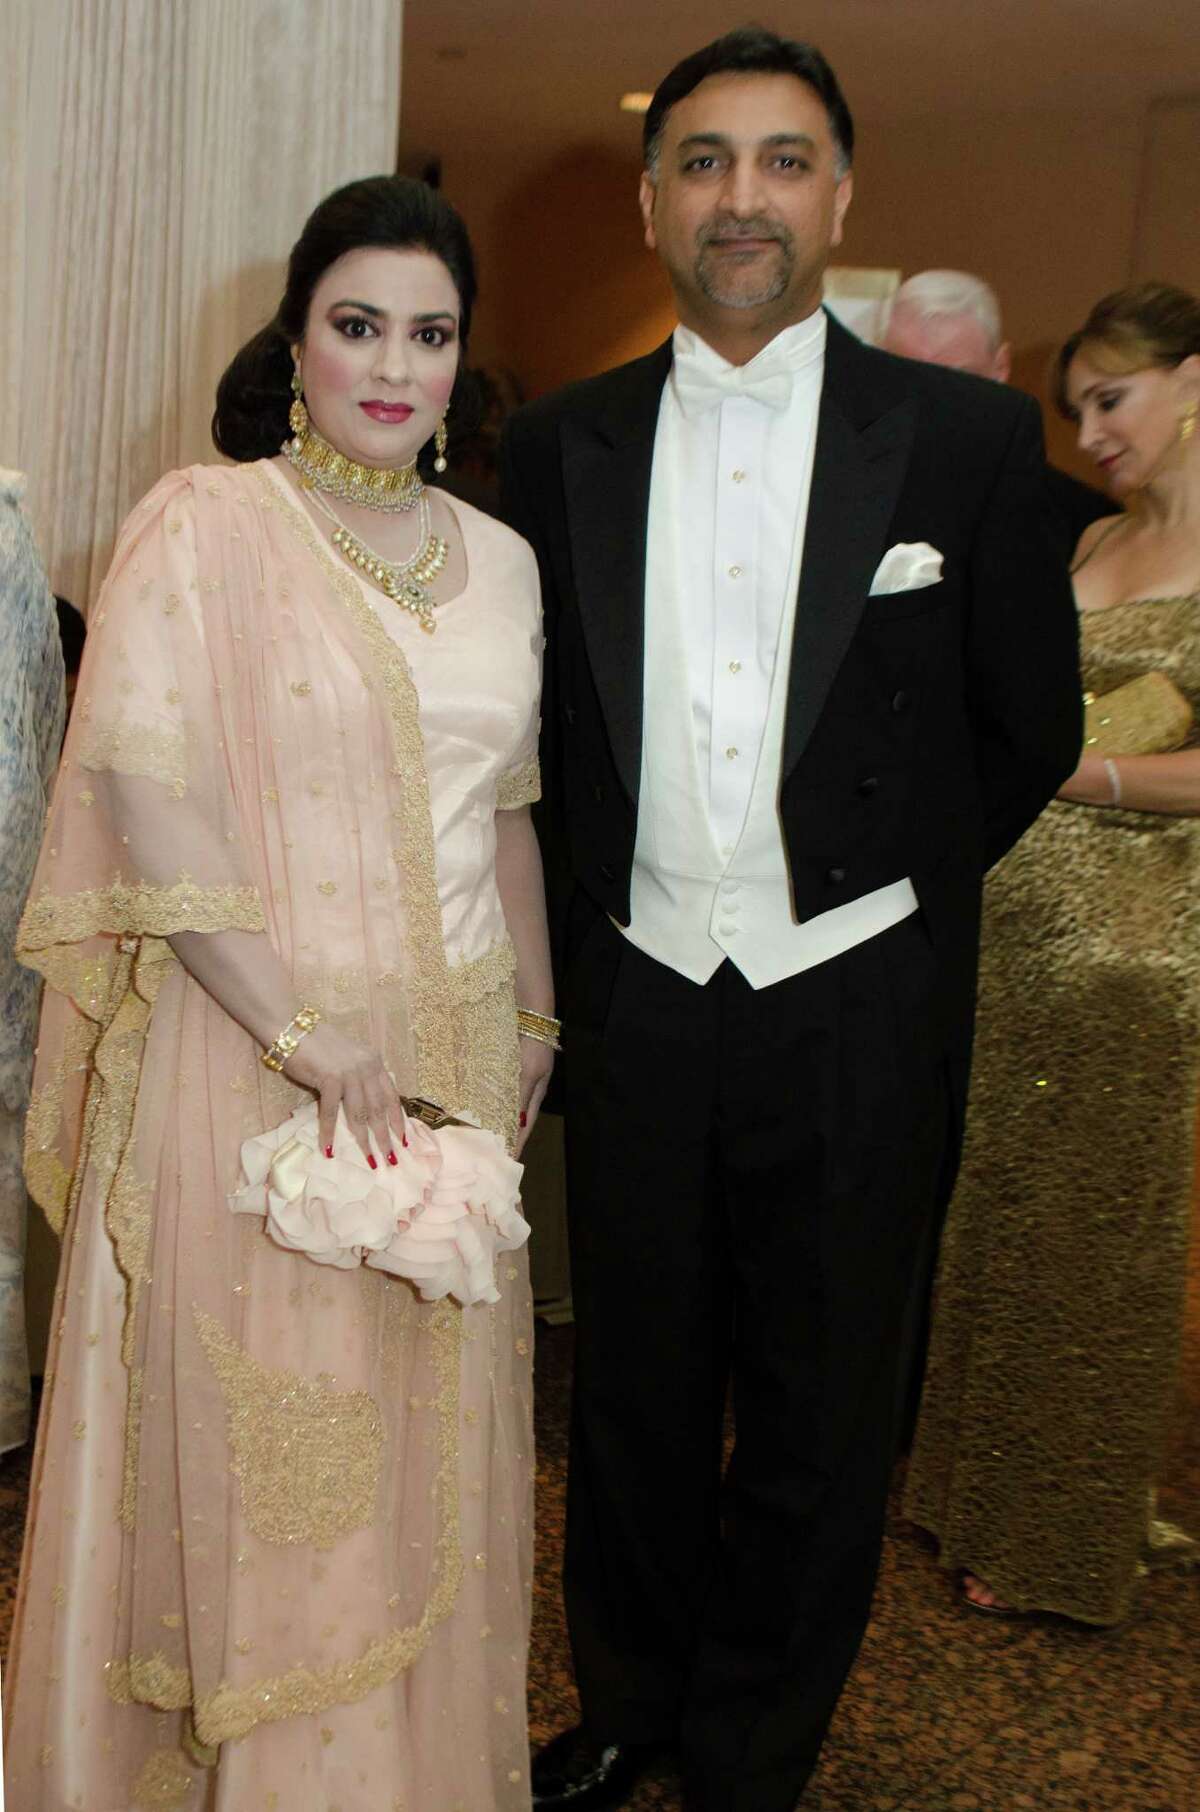 Maha and Omar Khan at the Inaugural Audrey Hepburn Society Ball benefiting UNICEF on Friday, September 6, 2013, at the Wortham Theater in Houston, TX.